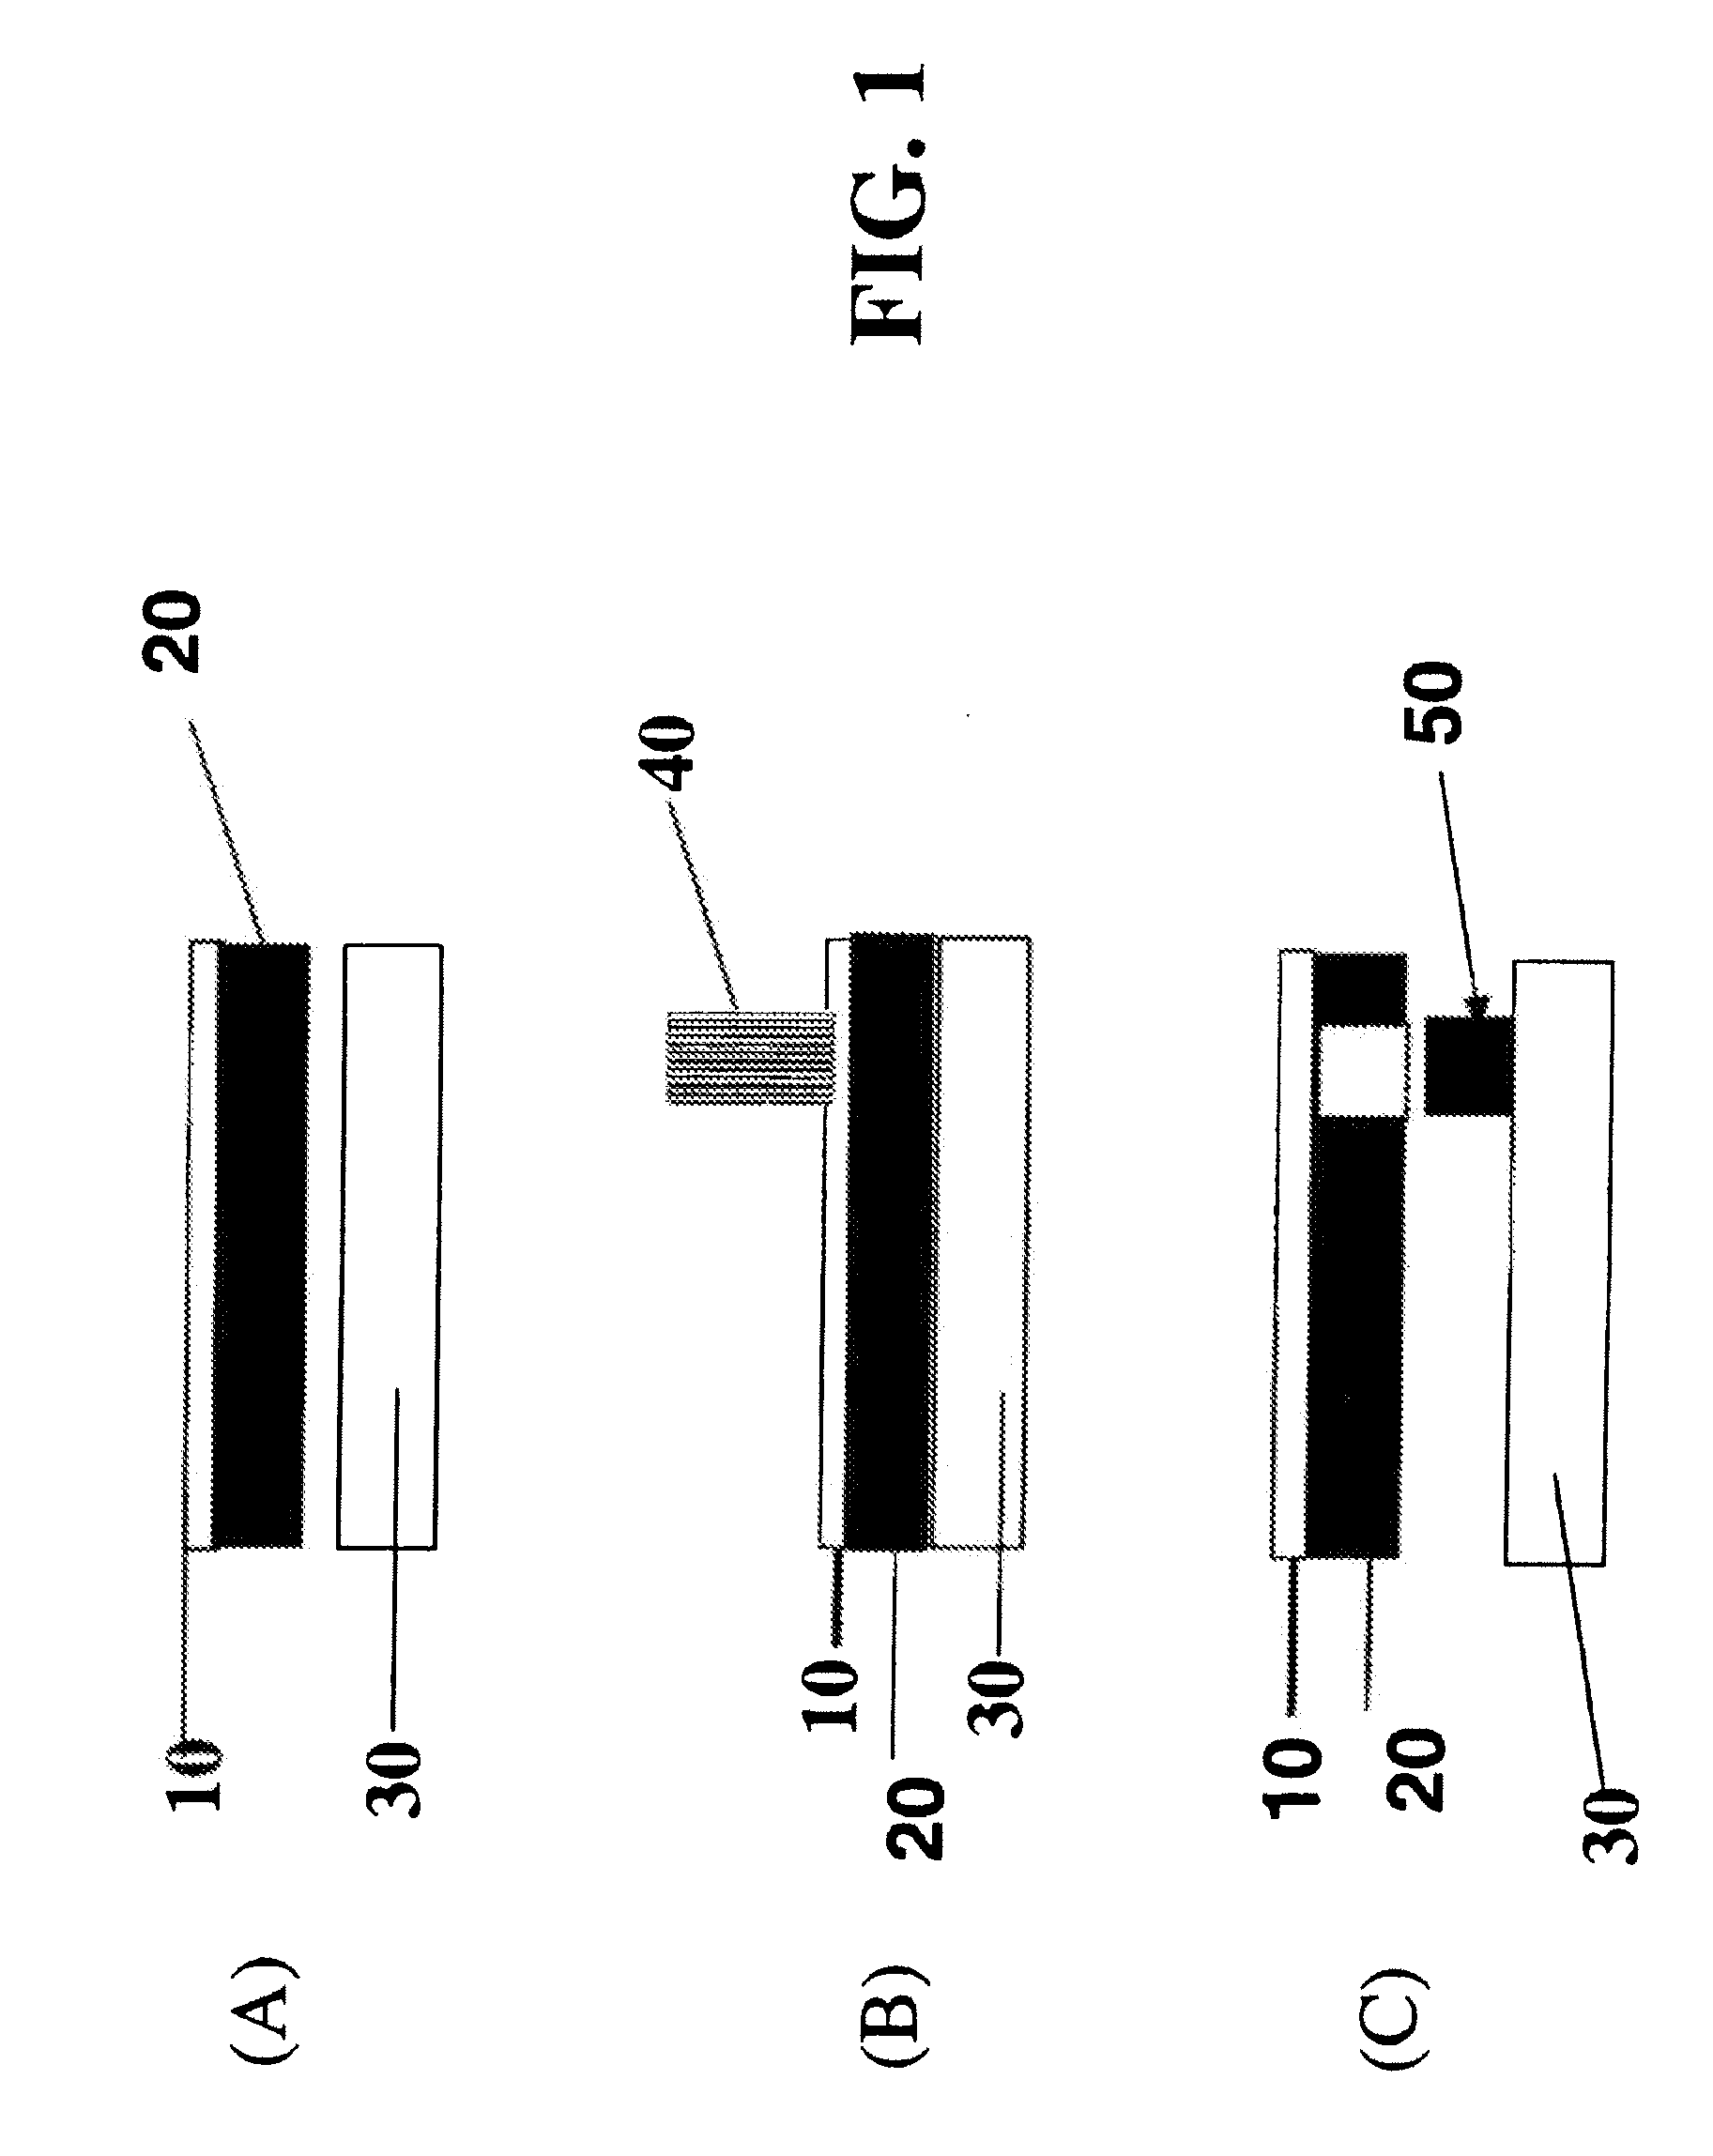 Laser transfer articles and method of making